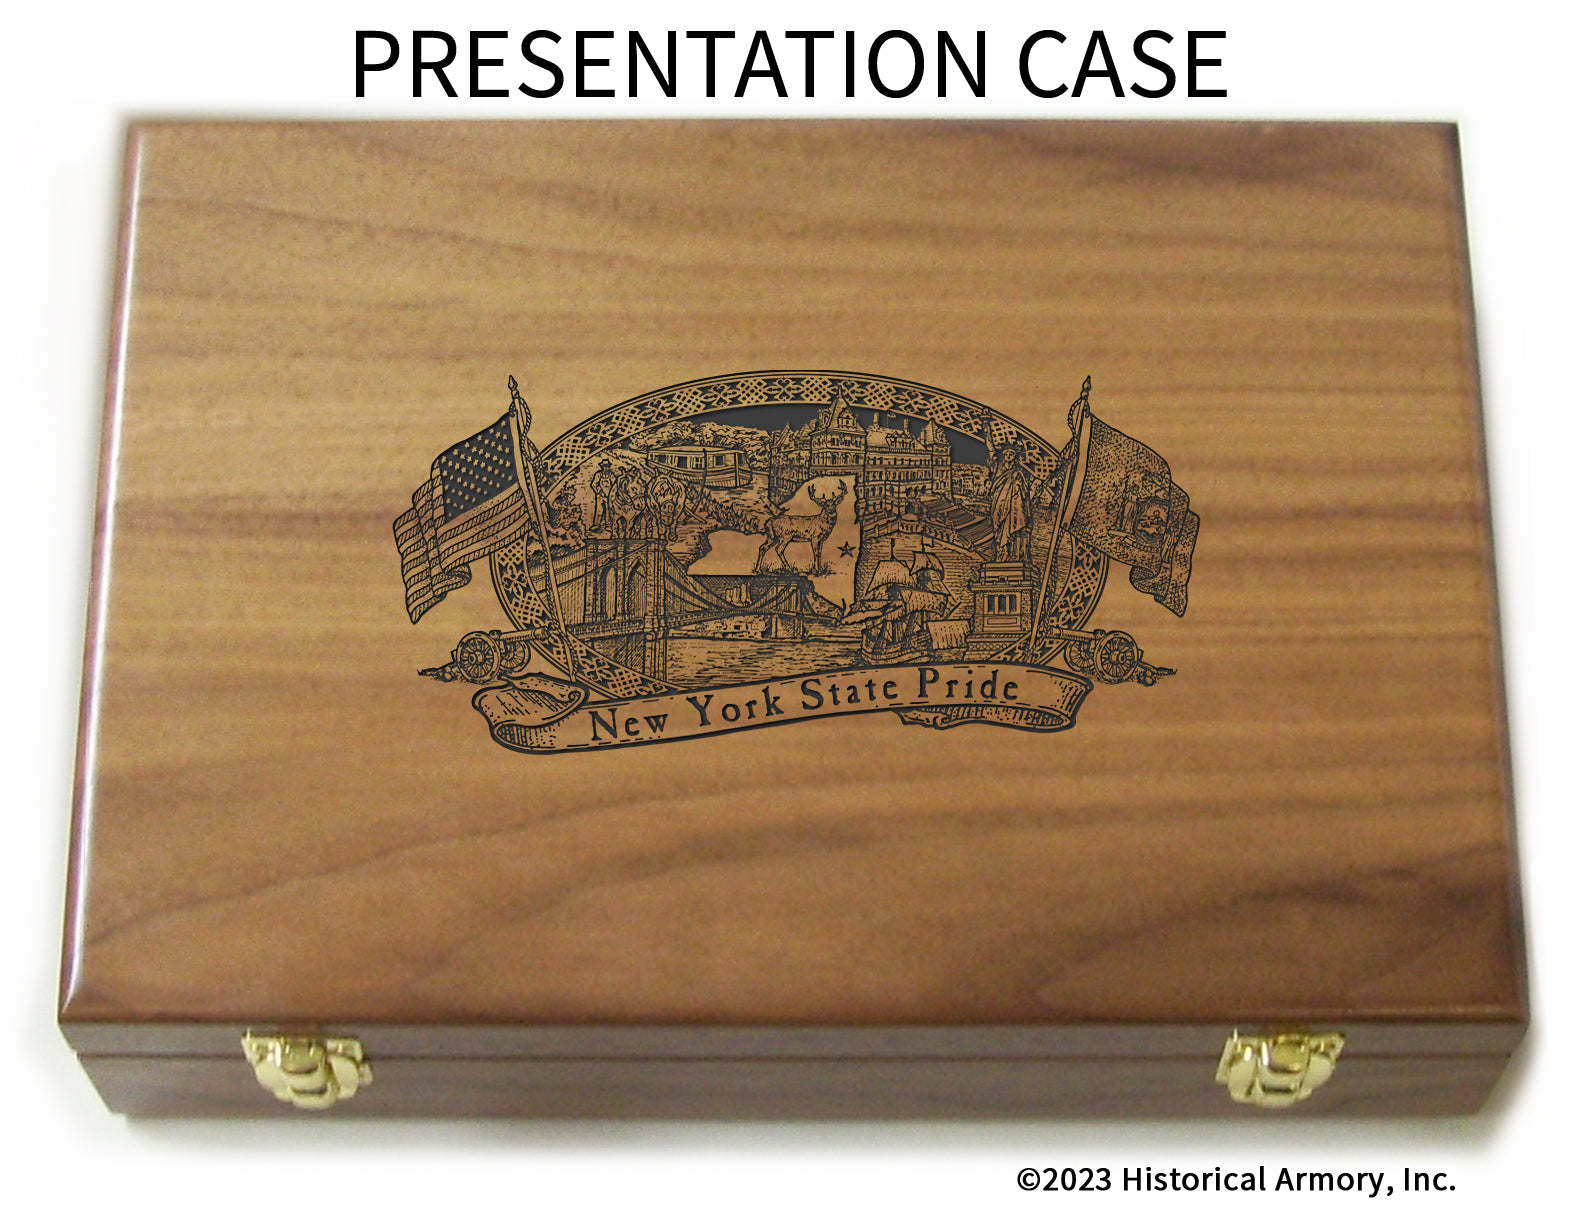 New York State Pride Limited Edition Engraved 1911 Presentation Case